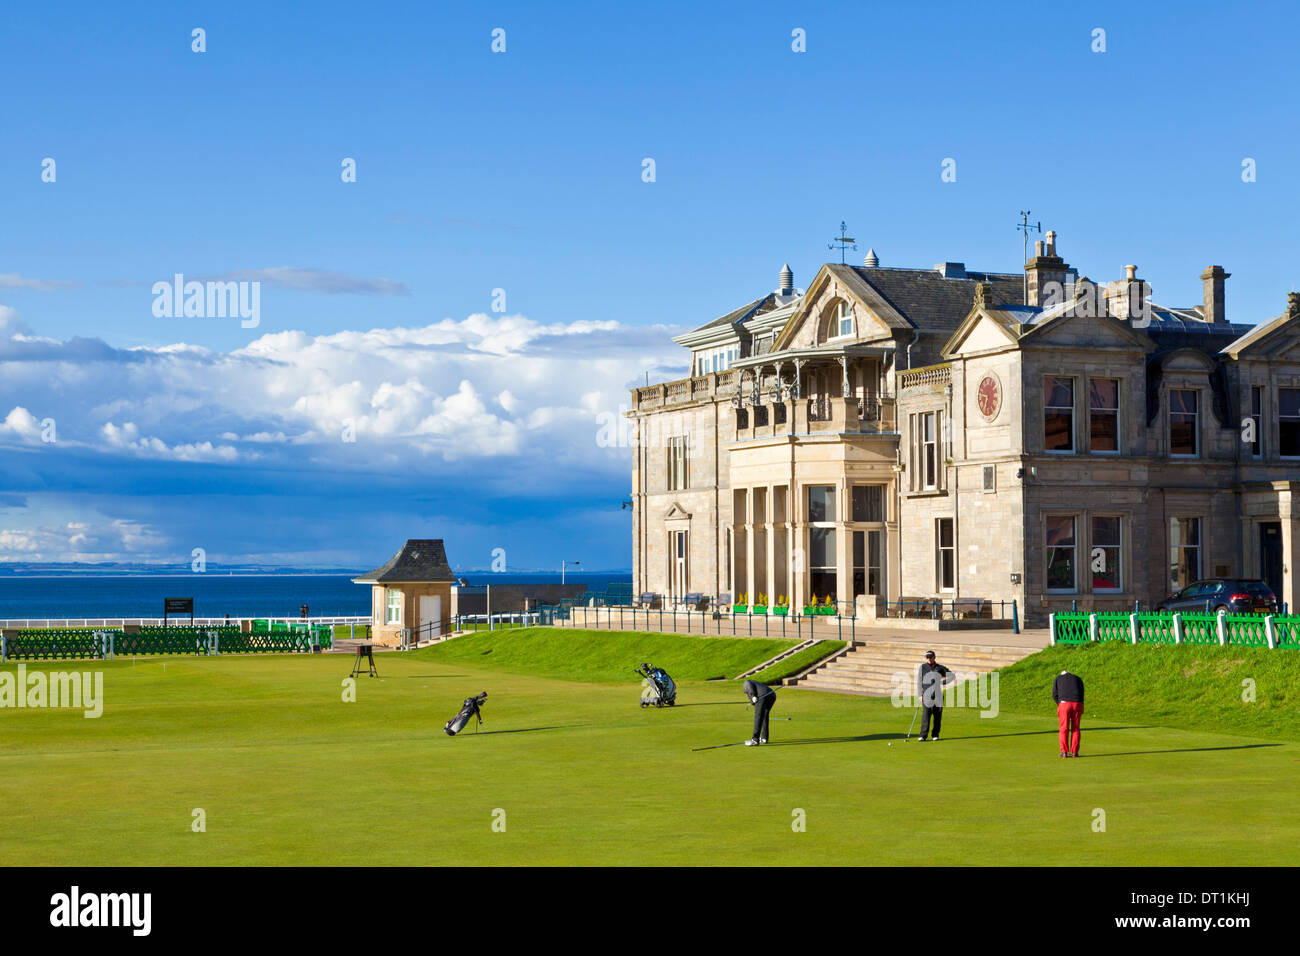 Golf et club house, le Royal and Ancient Golf Club of St Andrews, St Andrews, Fife, Scotland, Royaume-Uni, Europe Banque D'Images